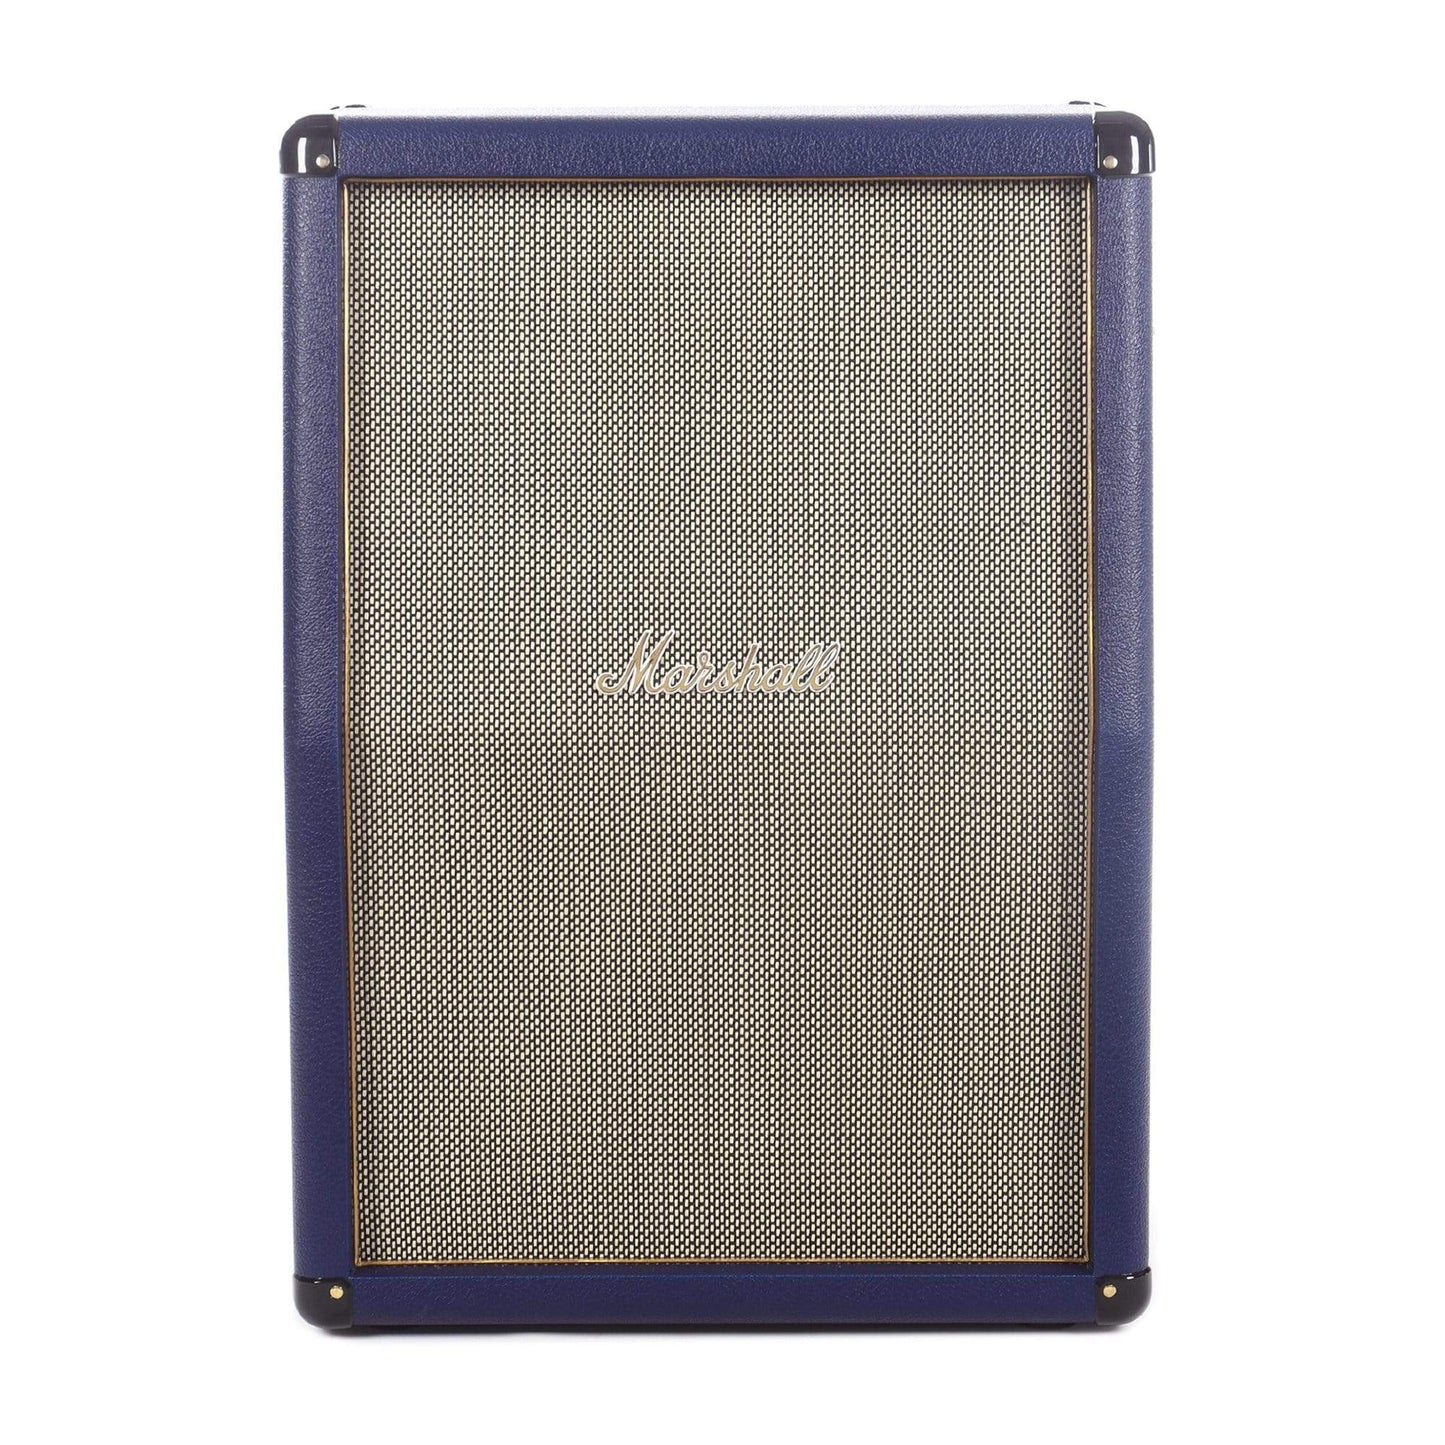 Marshall Limited Edition SC212 Studio Classic Navy Levant 2x12 Speaker Cabinet 140W 8 Ohm Mono Amps / Guitar Cabinets